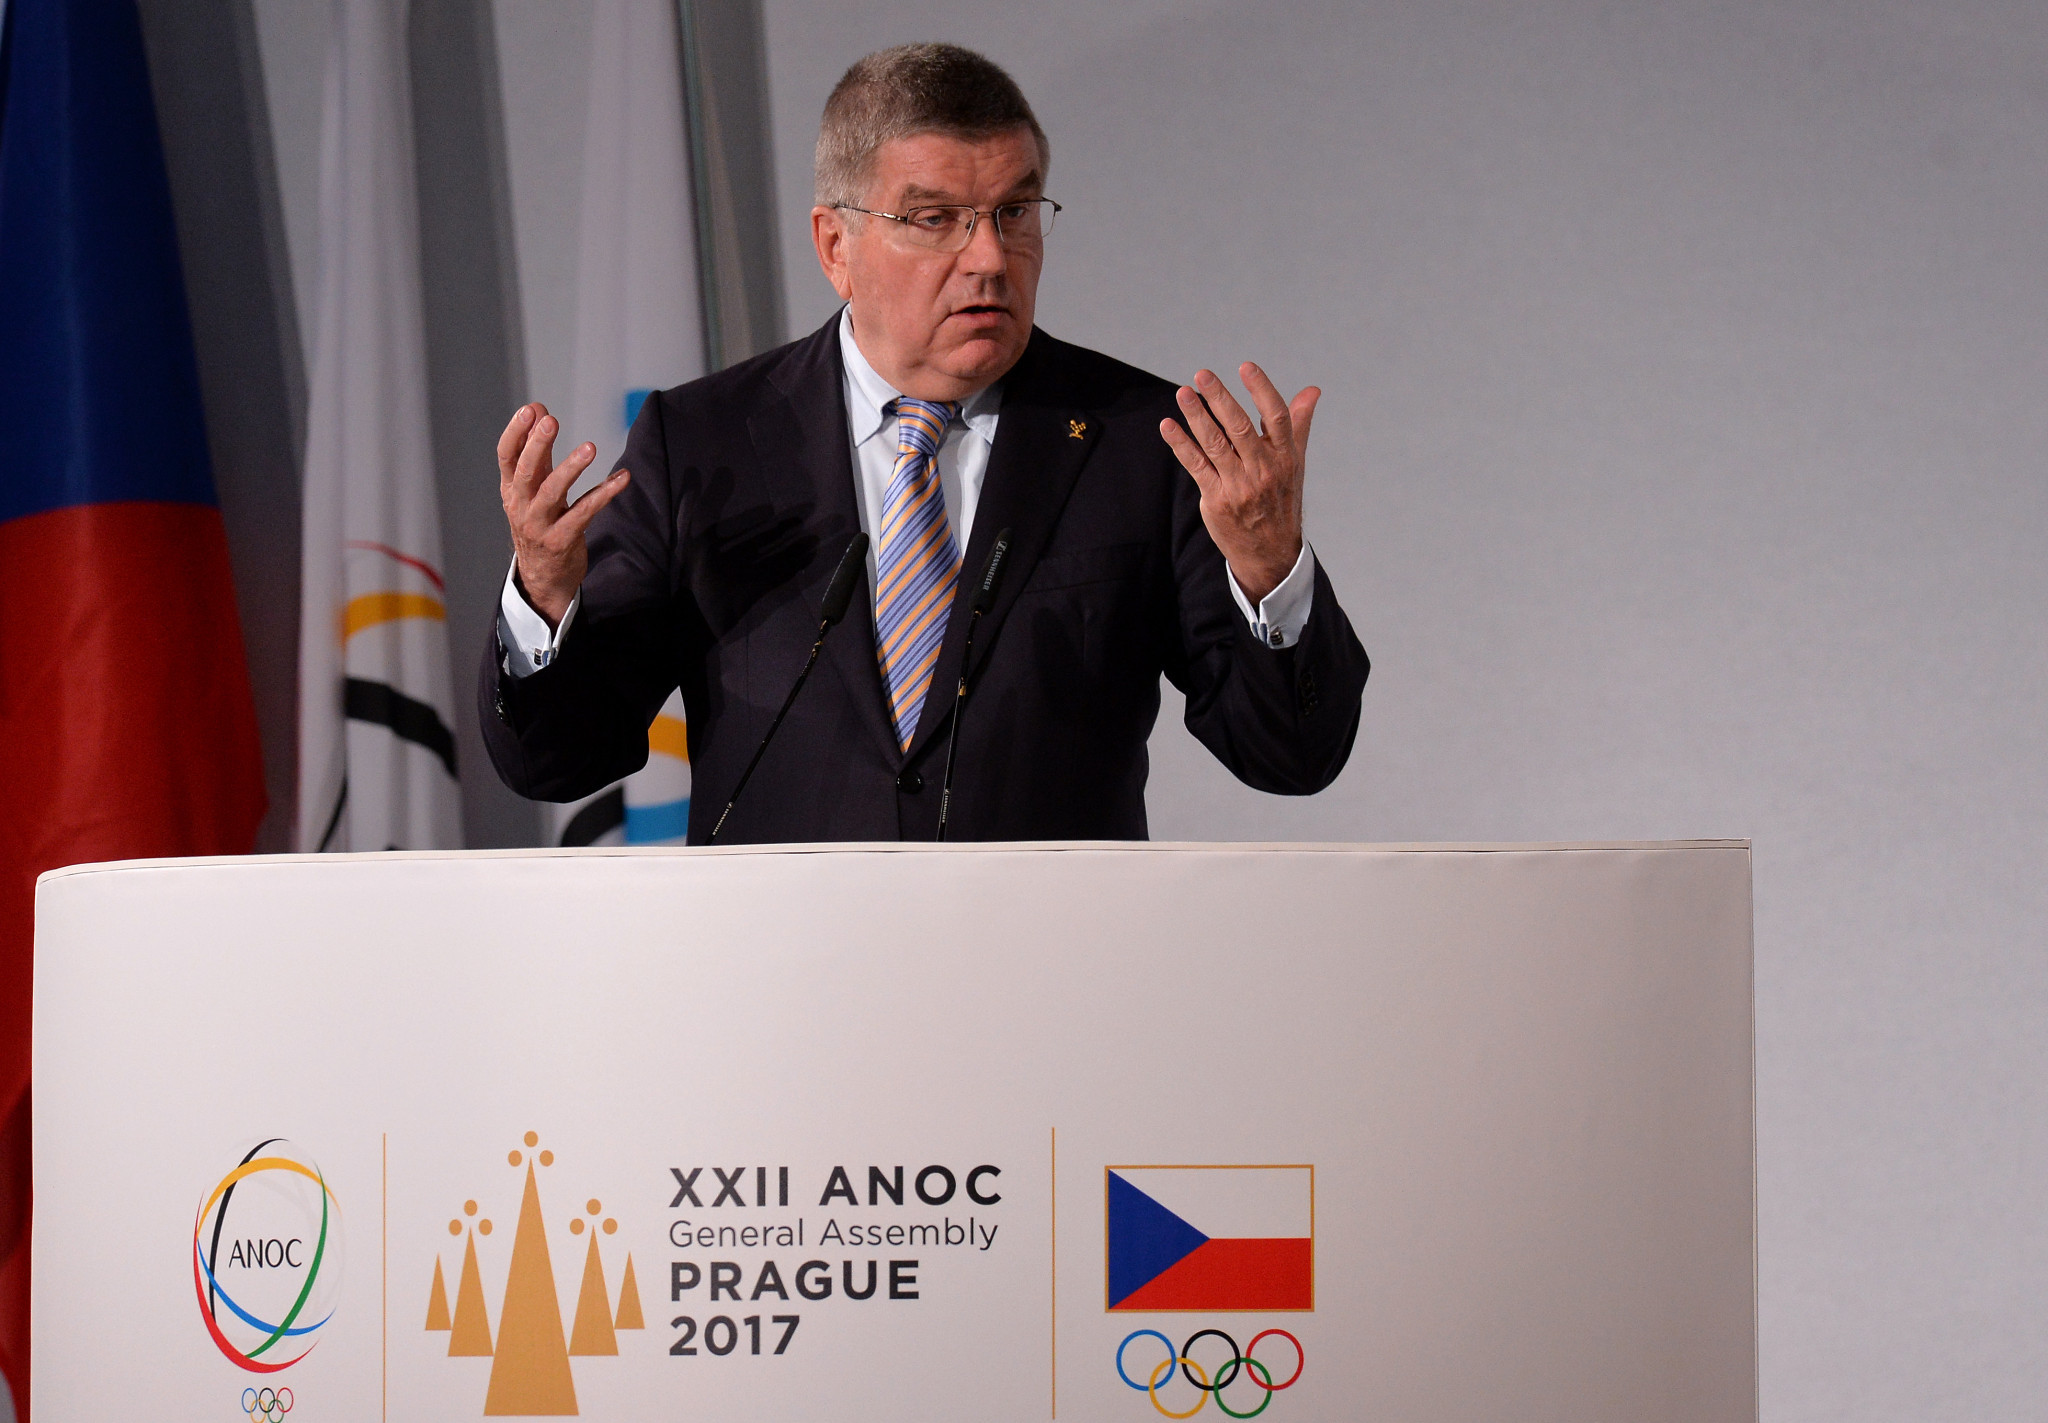 IOC President Thomas Bach pictured speaking at the ANOC General Assembly ©Getty Images